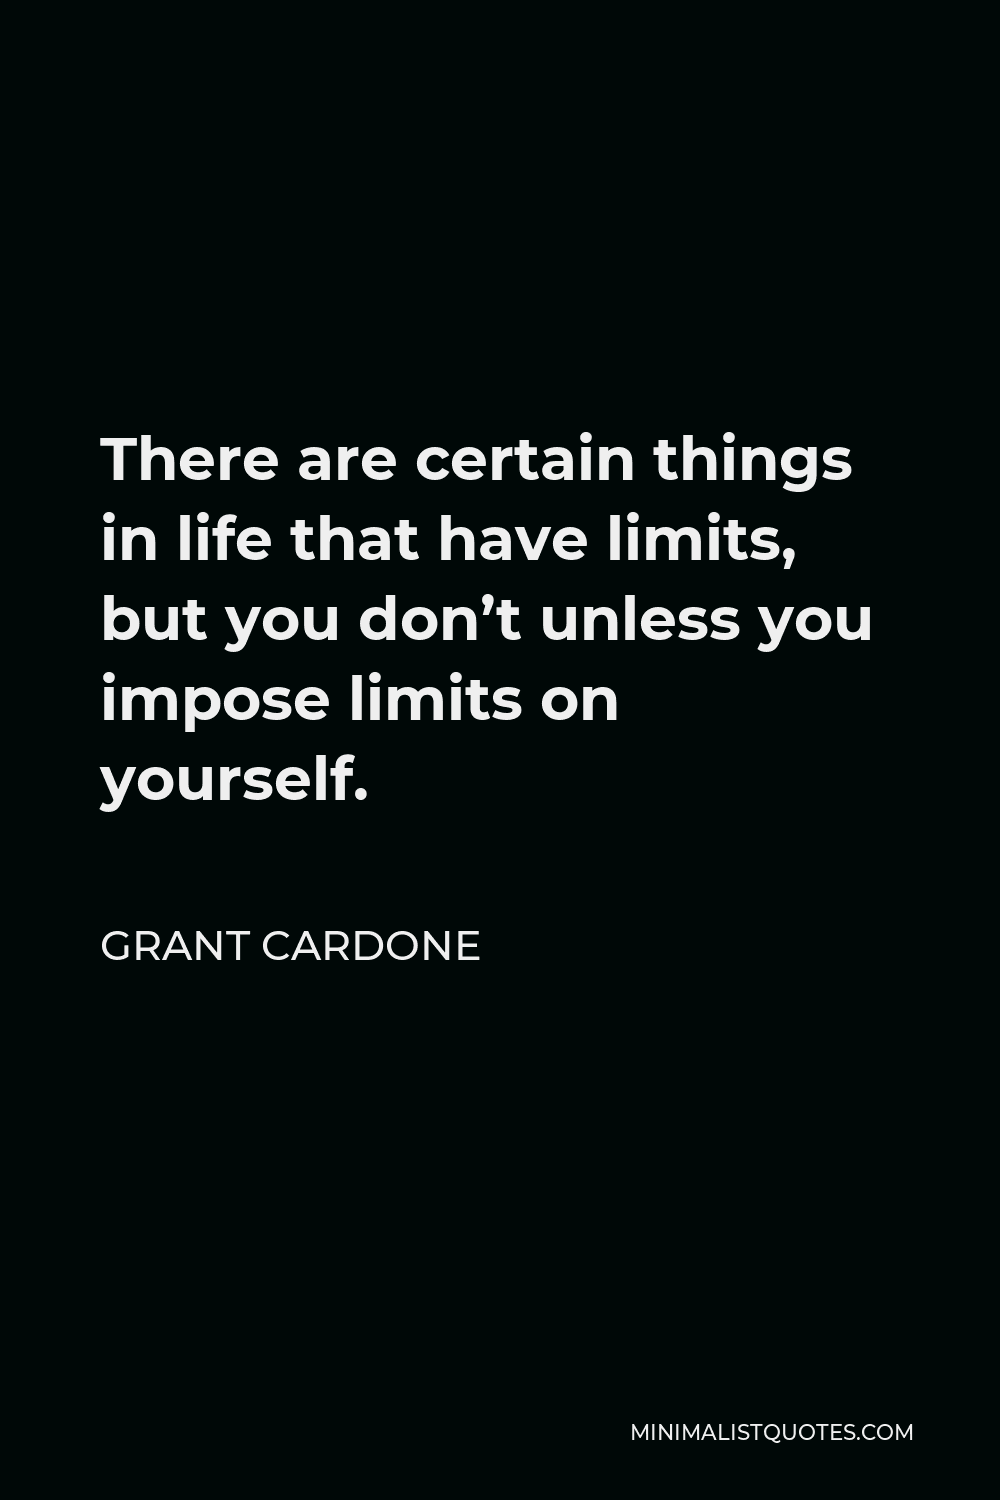 Grant Cardone Quote - There are certain things in life that have limits, but you don’t unless you impose limits on yourself.